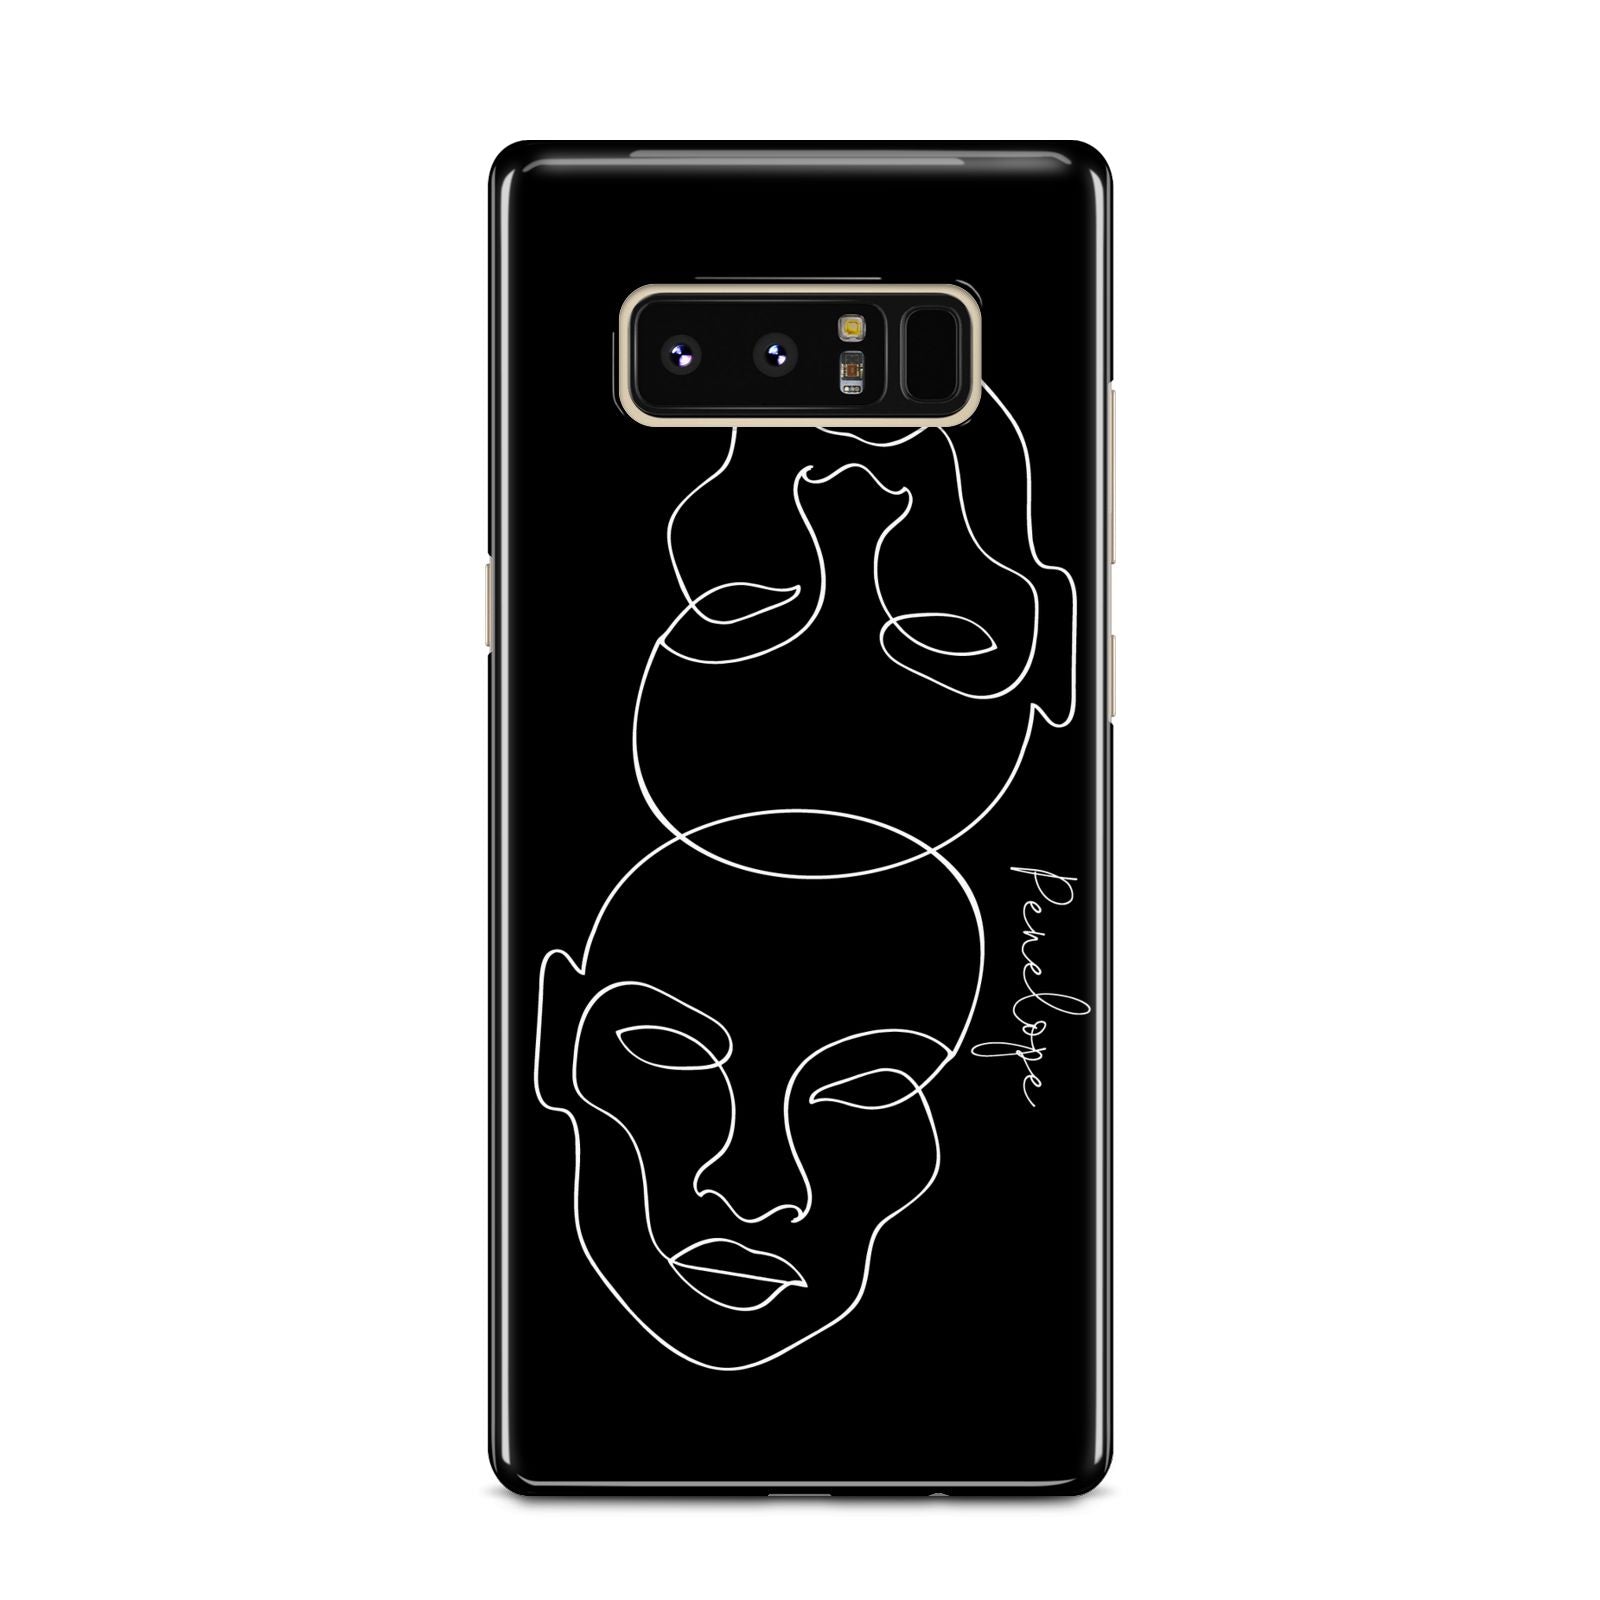 Personalised Abstract Line Art Samsung Galaxy Note 8 Case